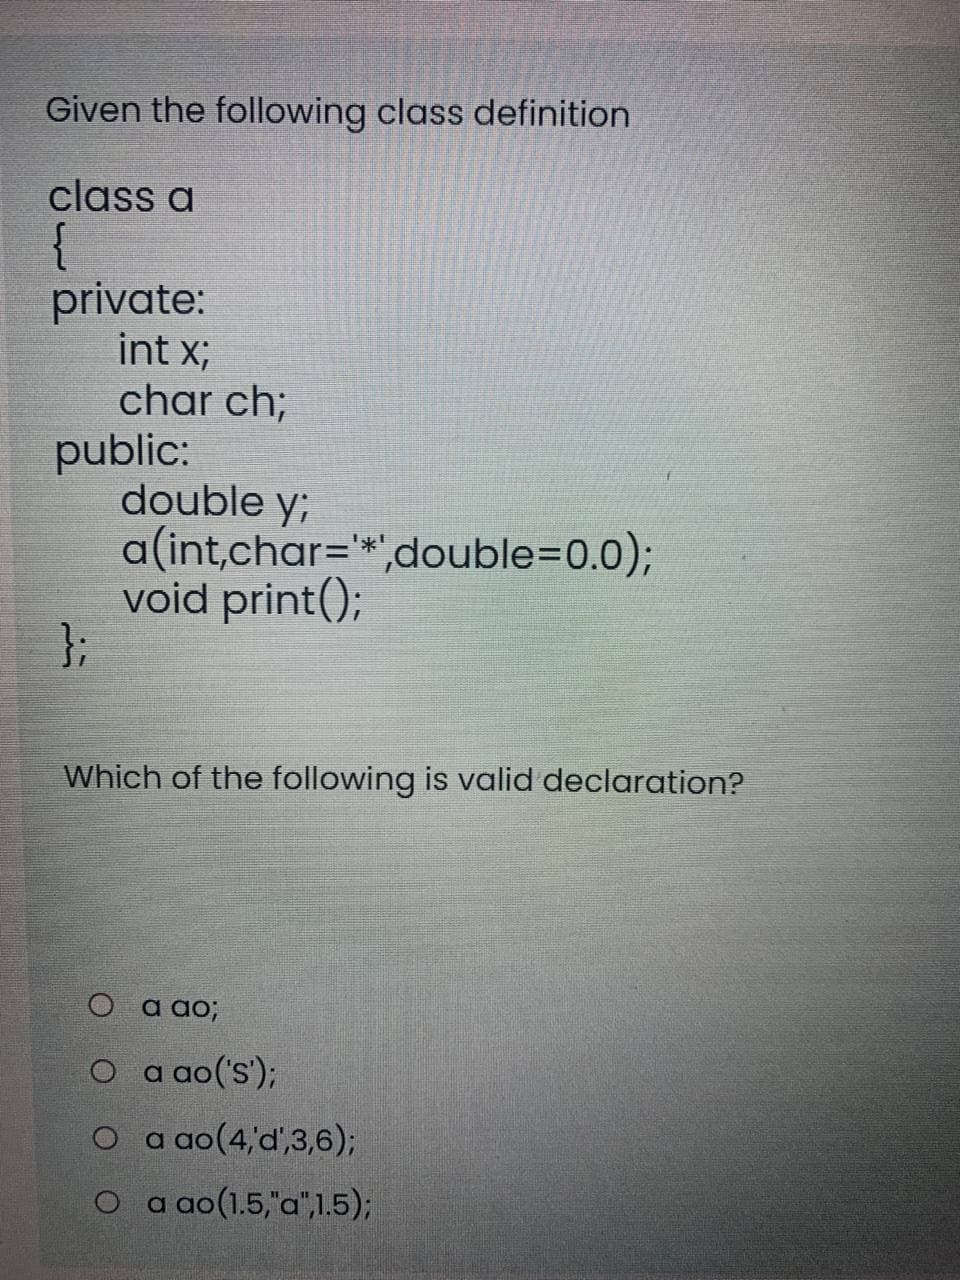 Given the following class definition
class a
private:
int x;
char ch;
public:
double y;
a(int,char=*',double=D0.0)3;
void print();
};
Which of the following is valid declaration?
O a ao;
O a ao('s');
O a ao(4'd'3,6);
O a ao(1.5,"a",1.5);
